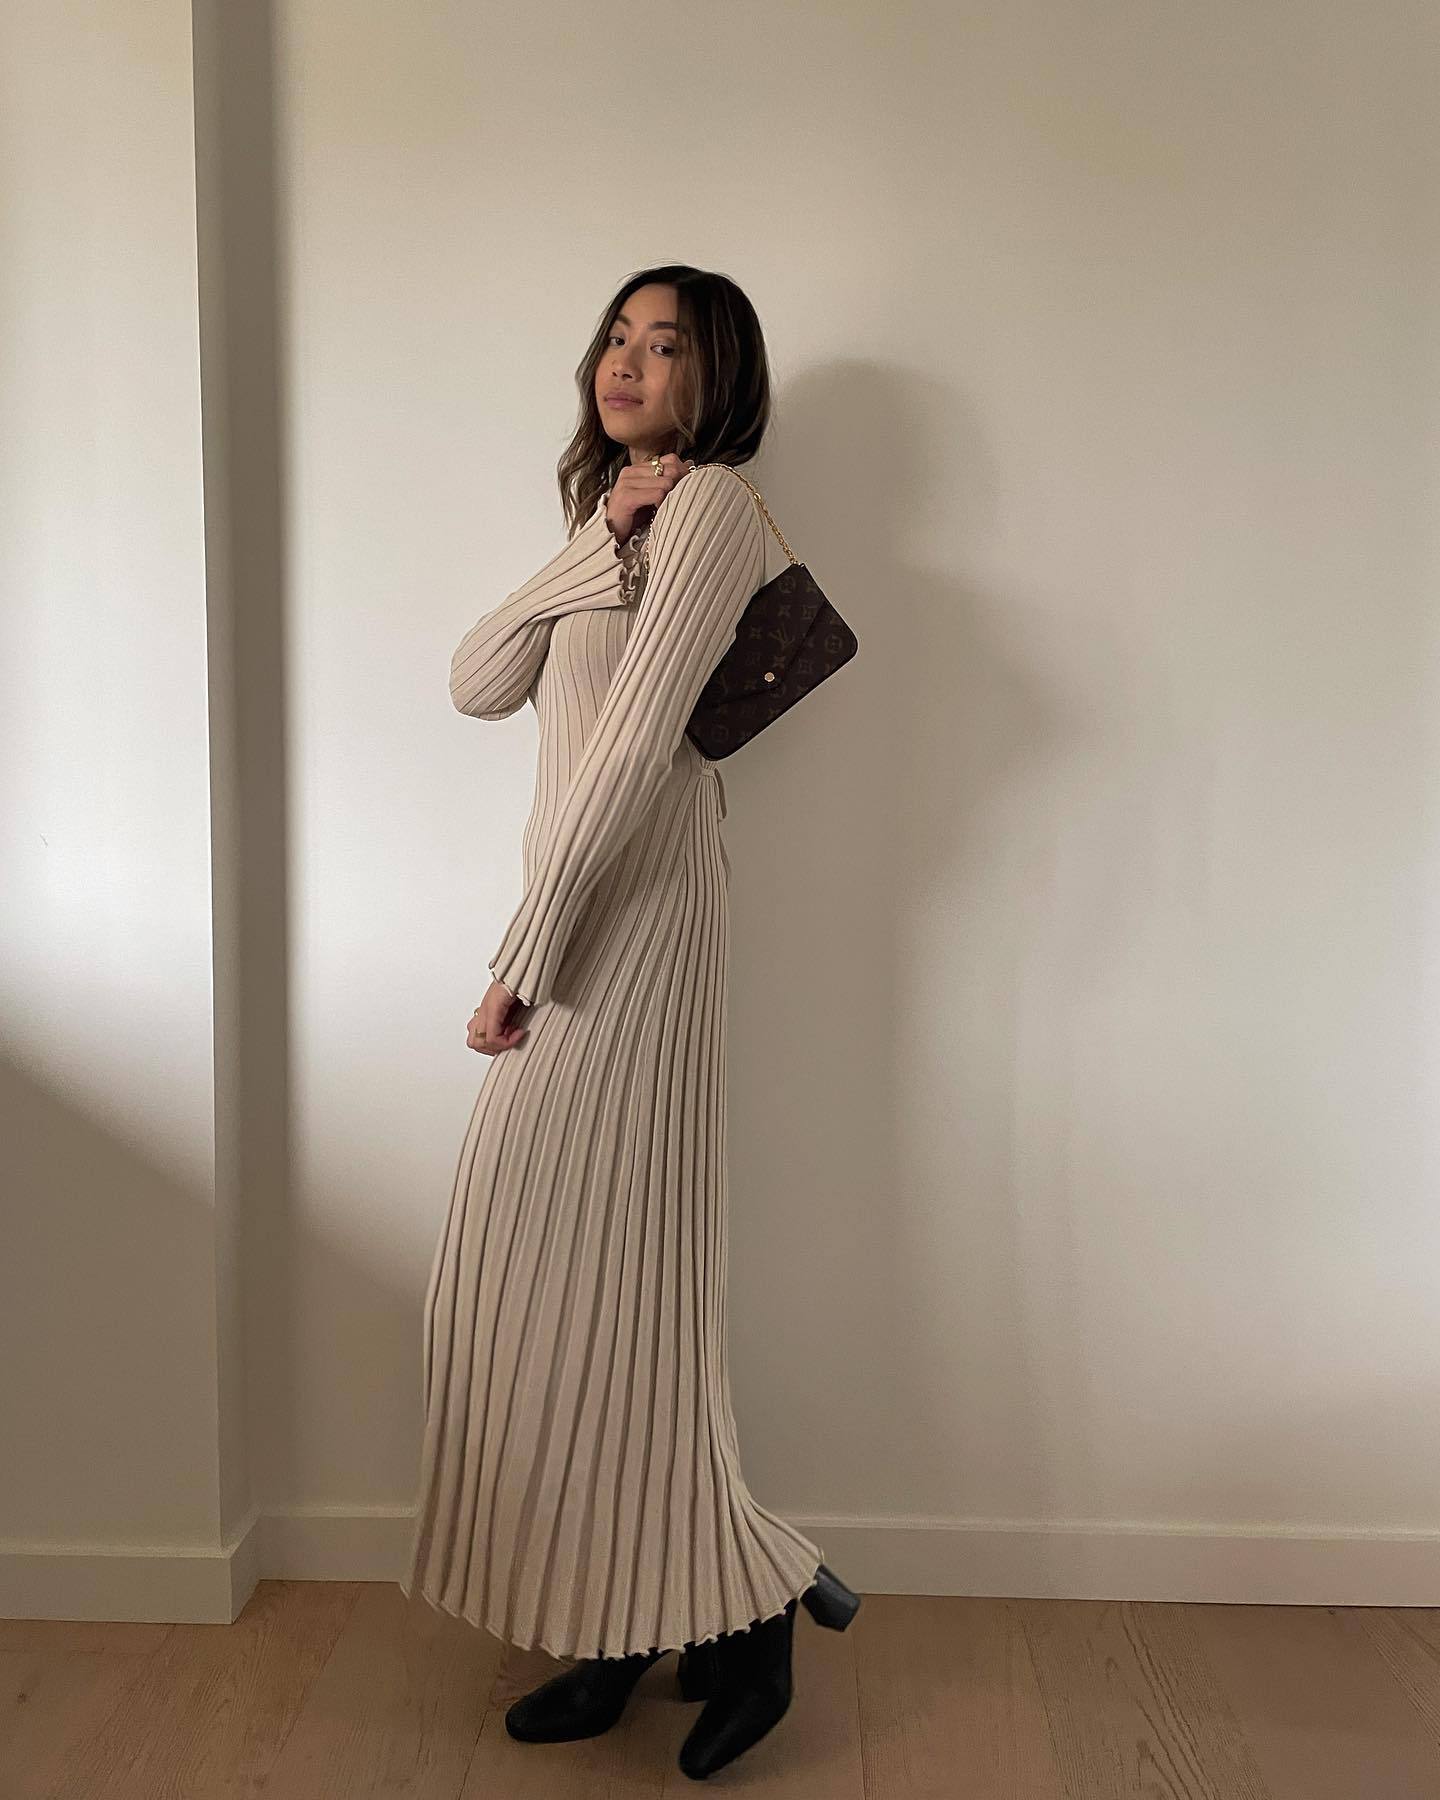 Winter Dresses | Knitted Cotton Long Sleeve Maxi Dress